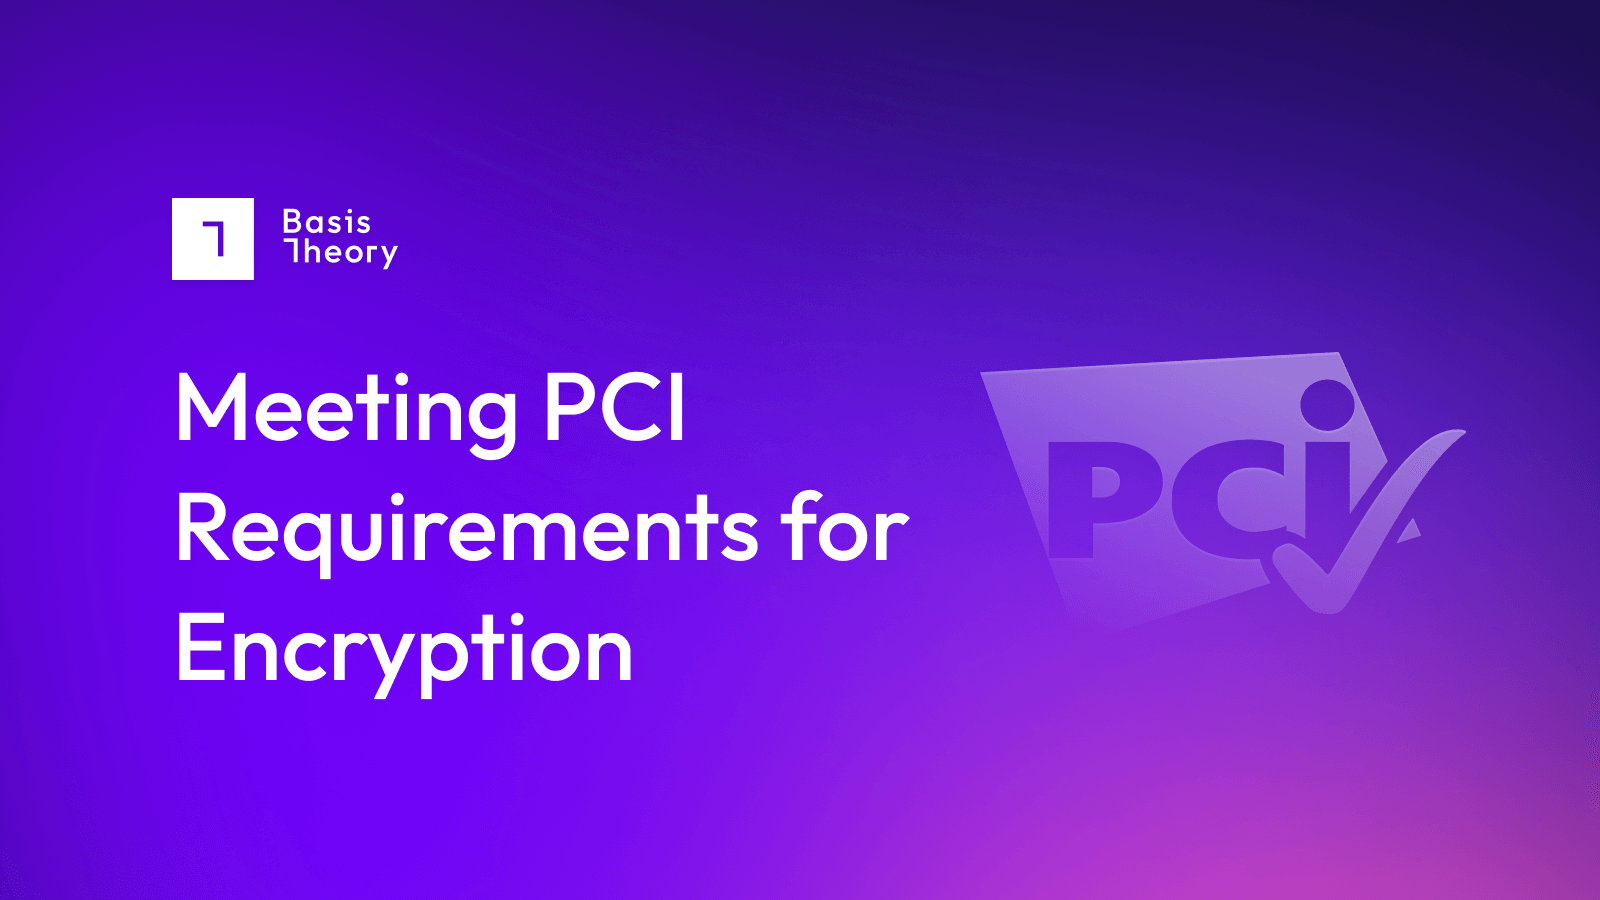 meeting PCI requirements for encryption